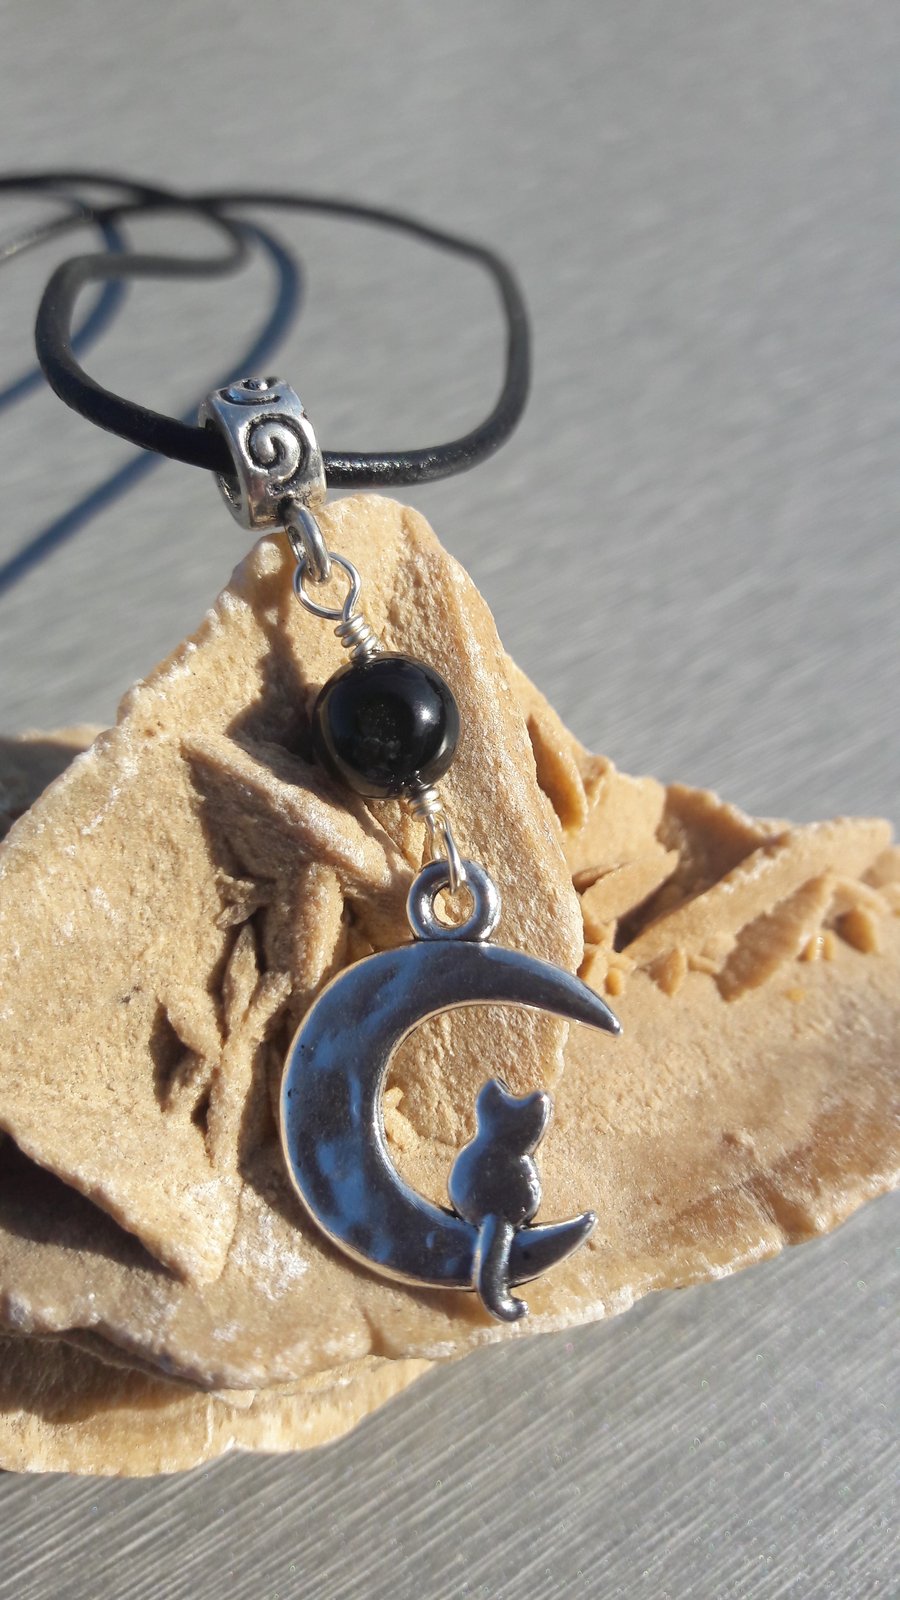 Cat in the Moon and Black Agate Pendant on Leather Cord Necklace